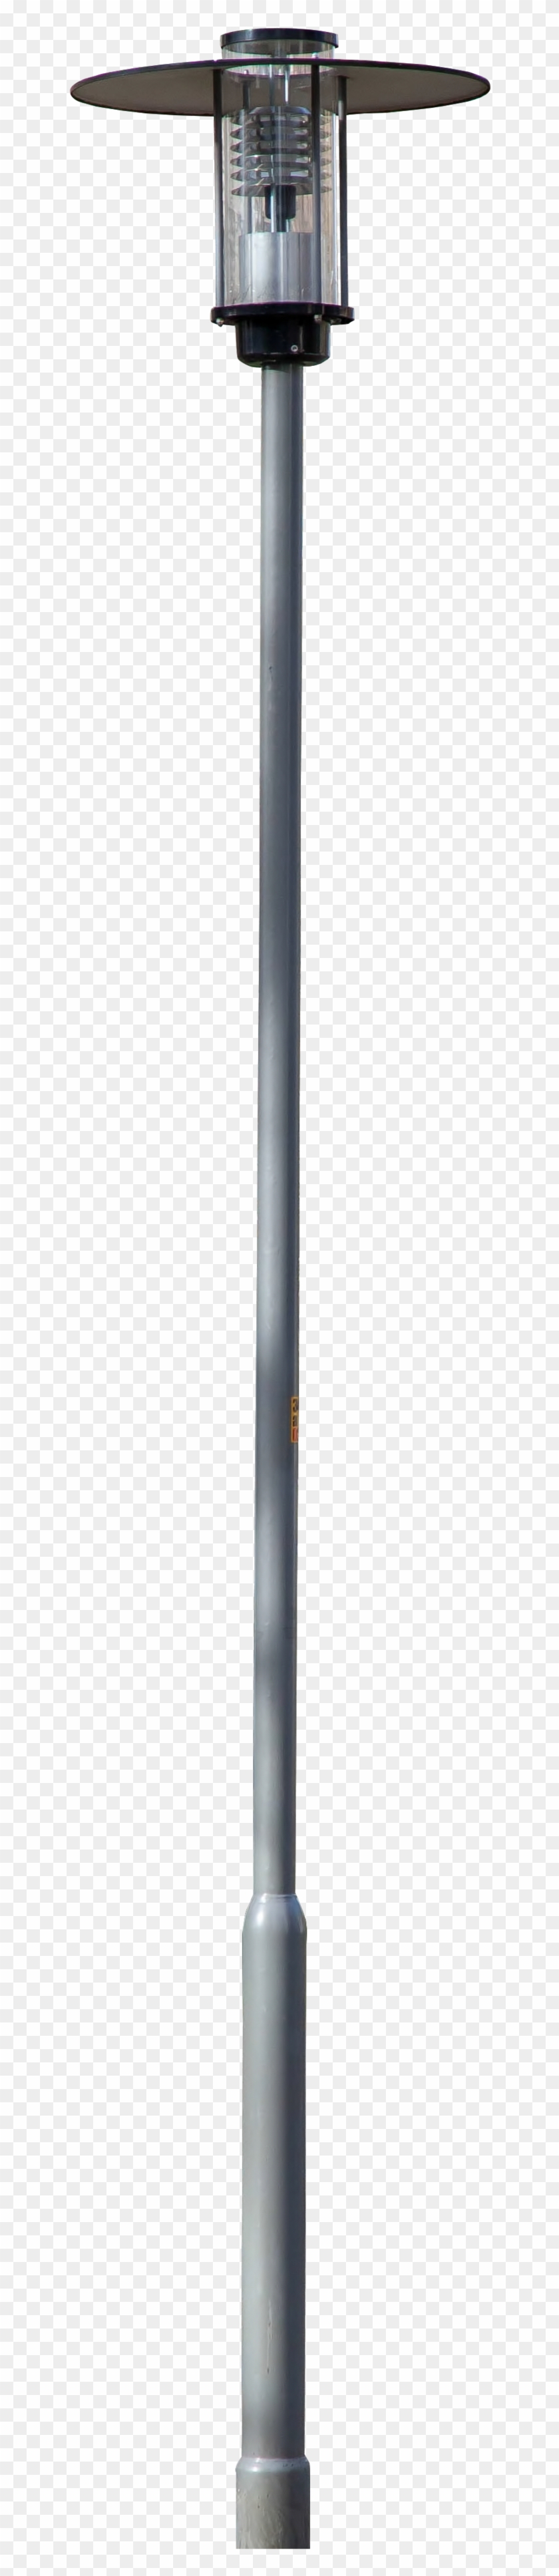 Awesome Street Light Png With Street Lamp Clipart Png - Street #463783